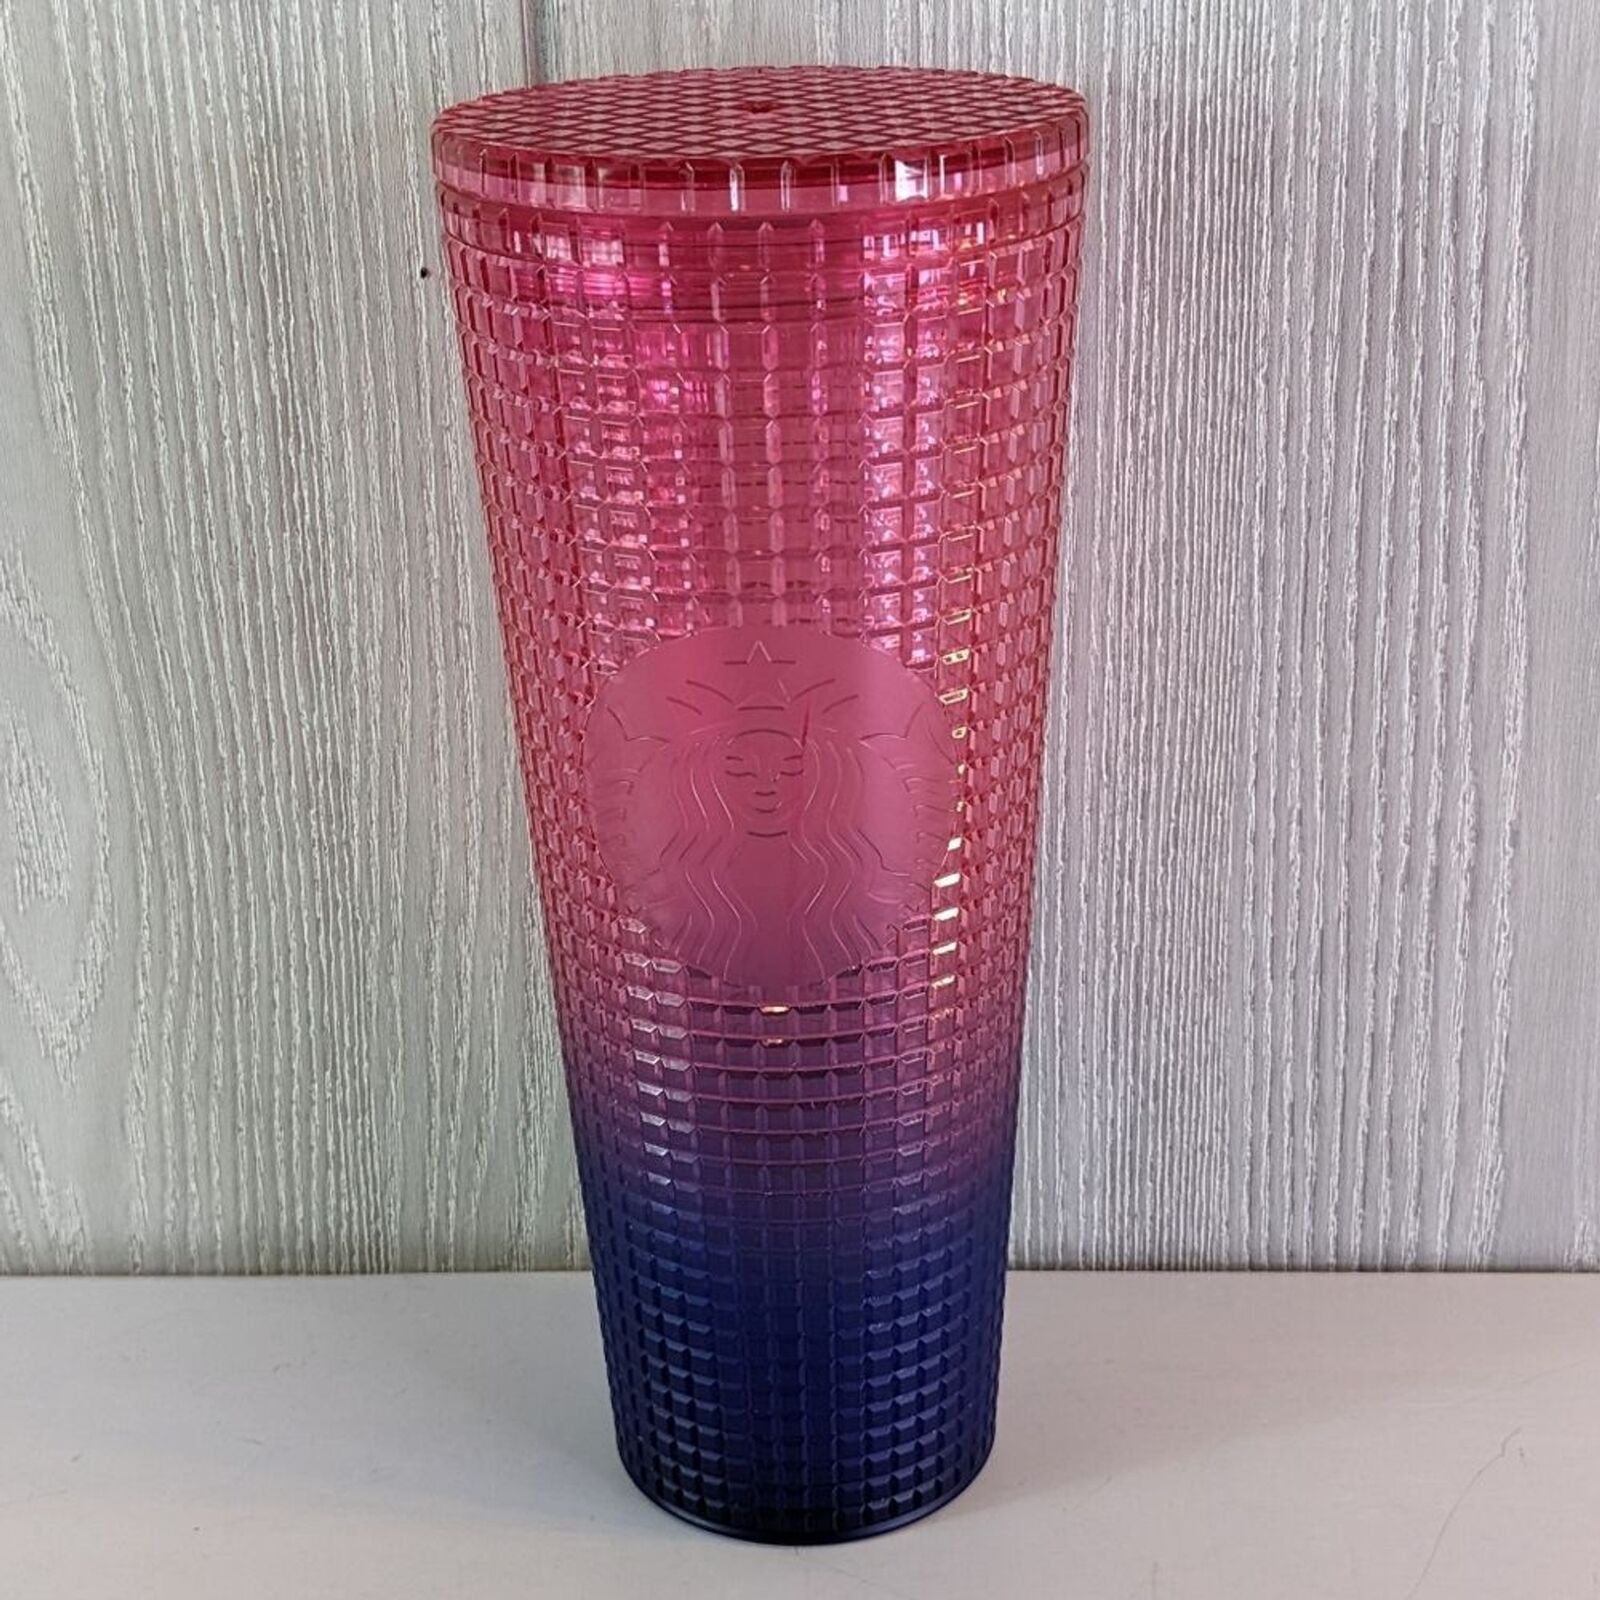 Starbucks Gridded Tumbler Pink Blue Ombre Cold Venti Cup 24 oz Limited Edition